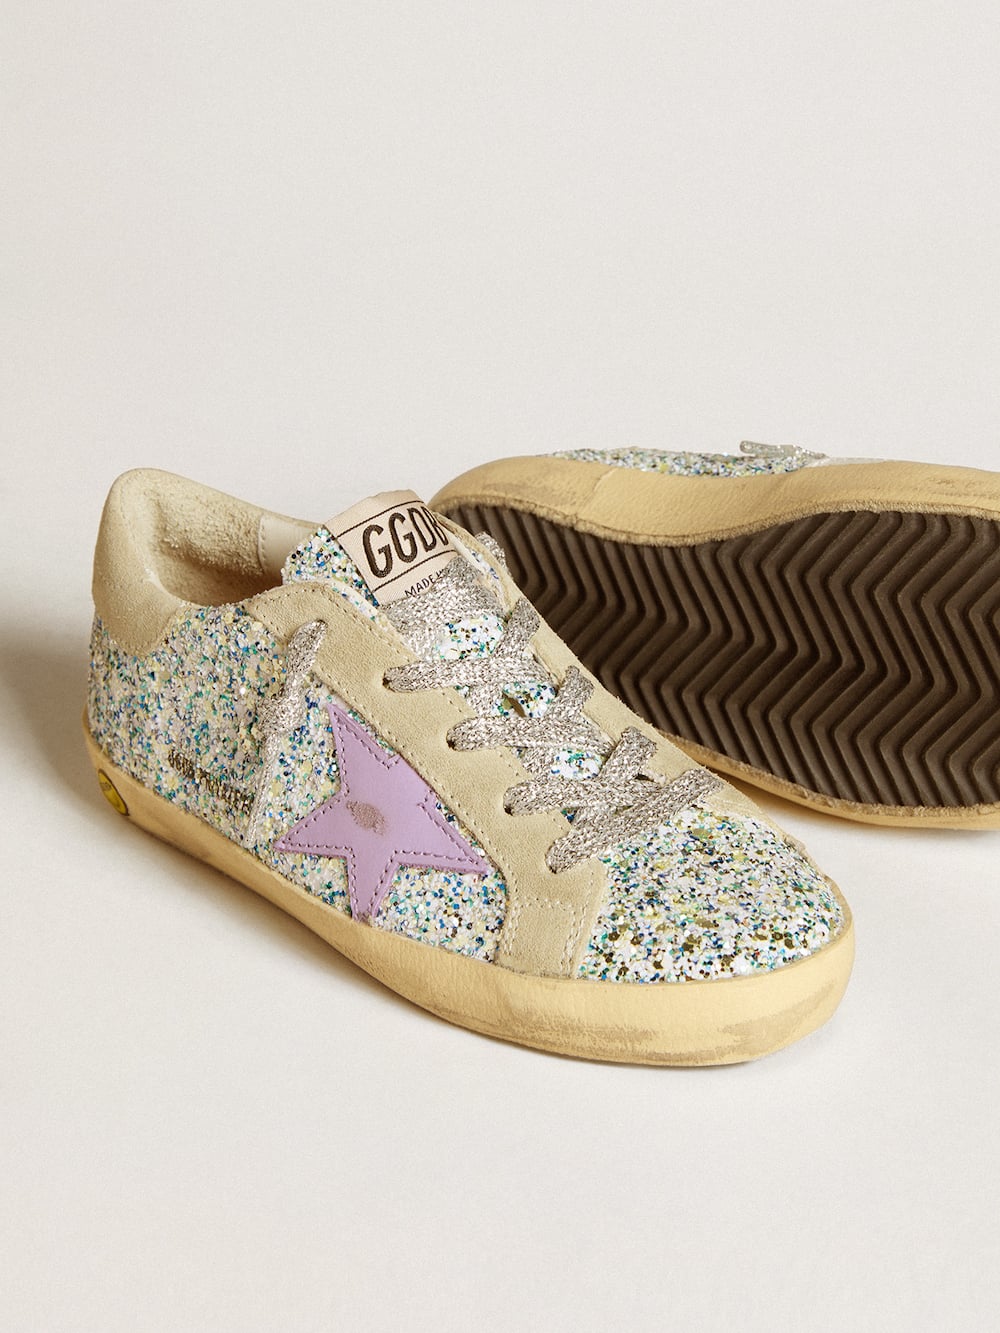 Golden Goose - Super-Star LTD in multicolored glitter with lilac leather star in 